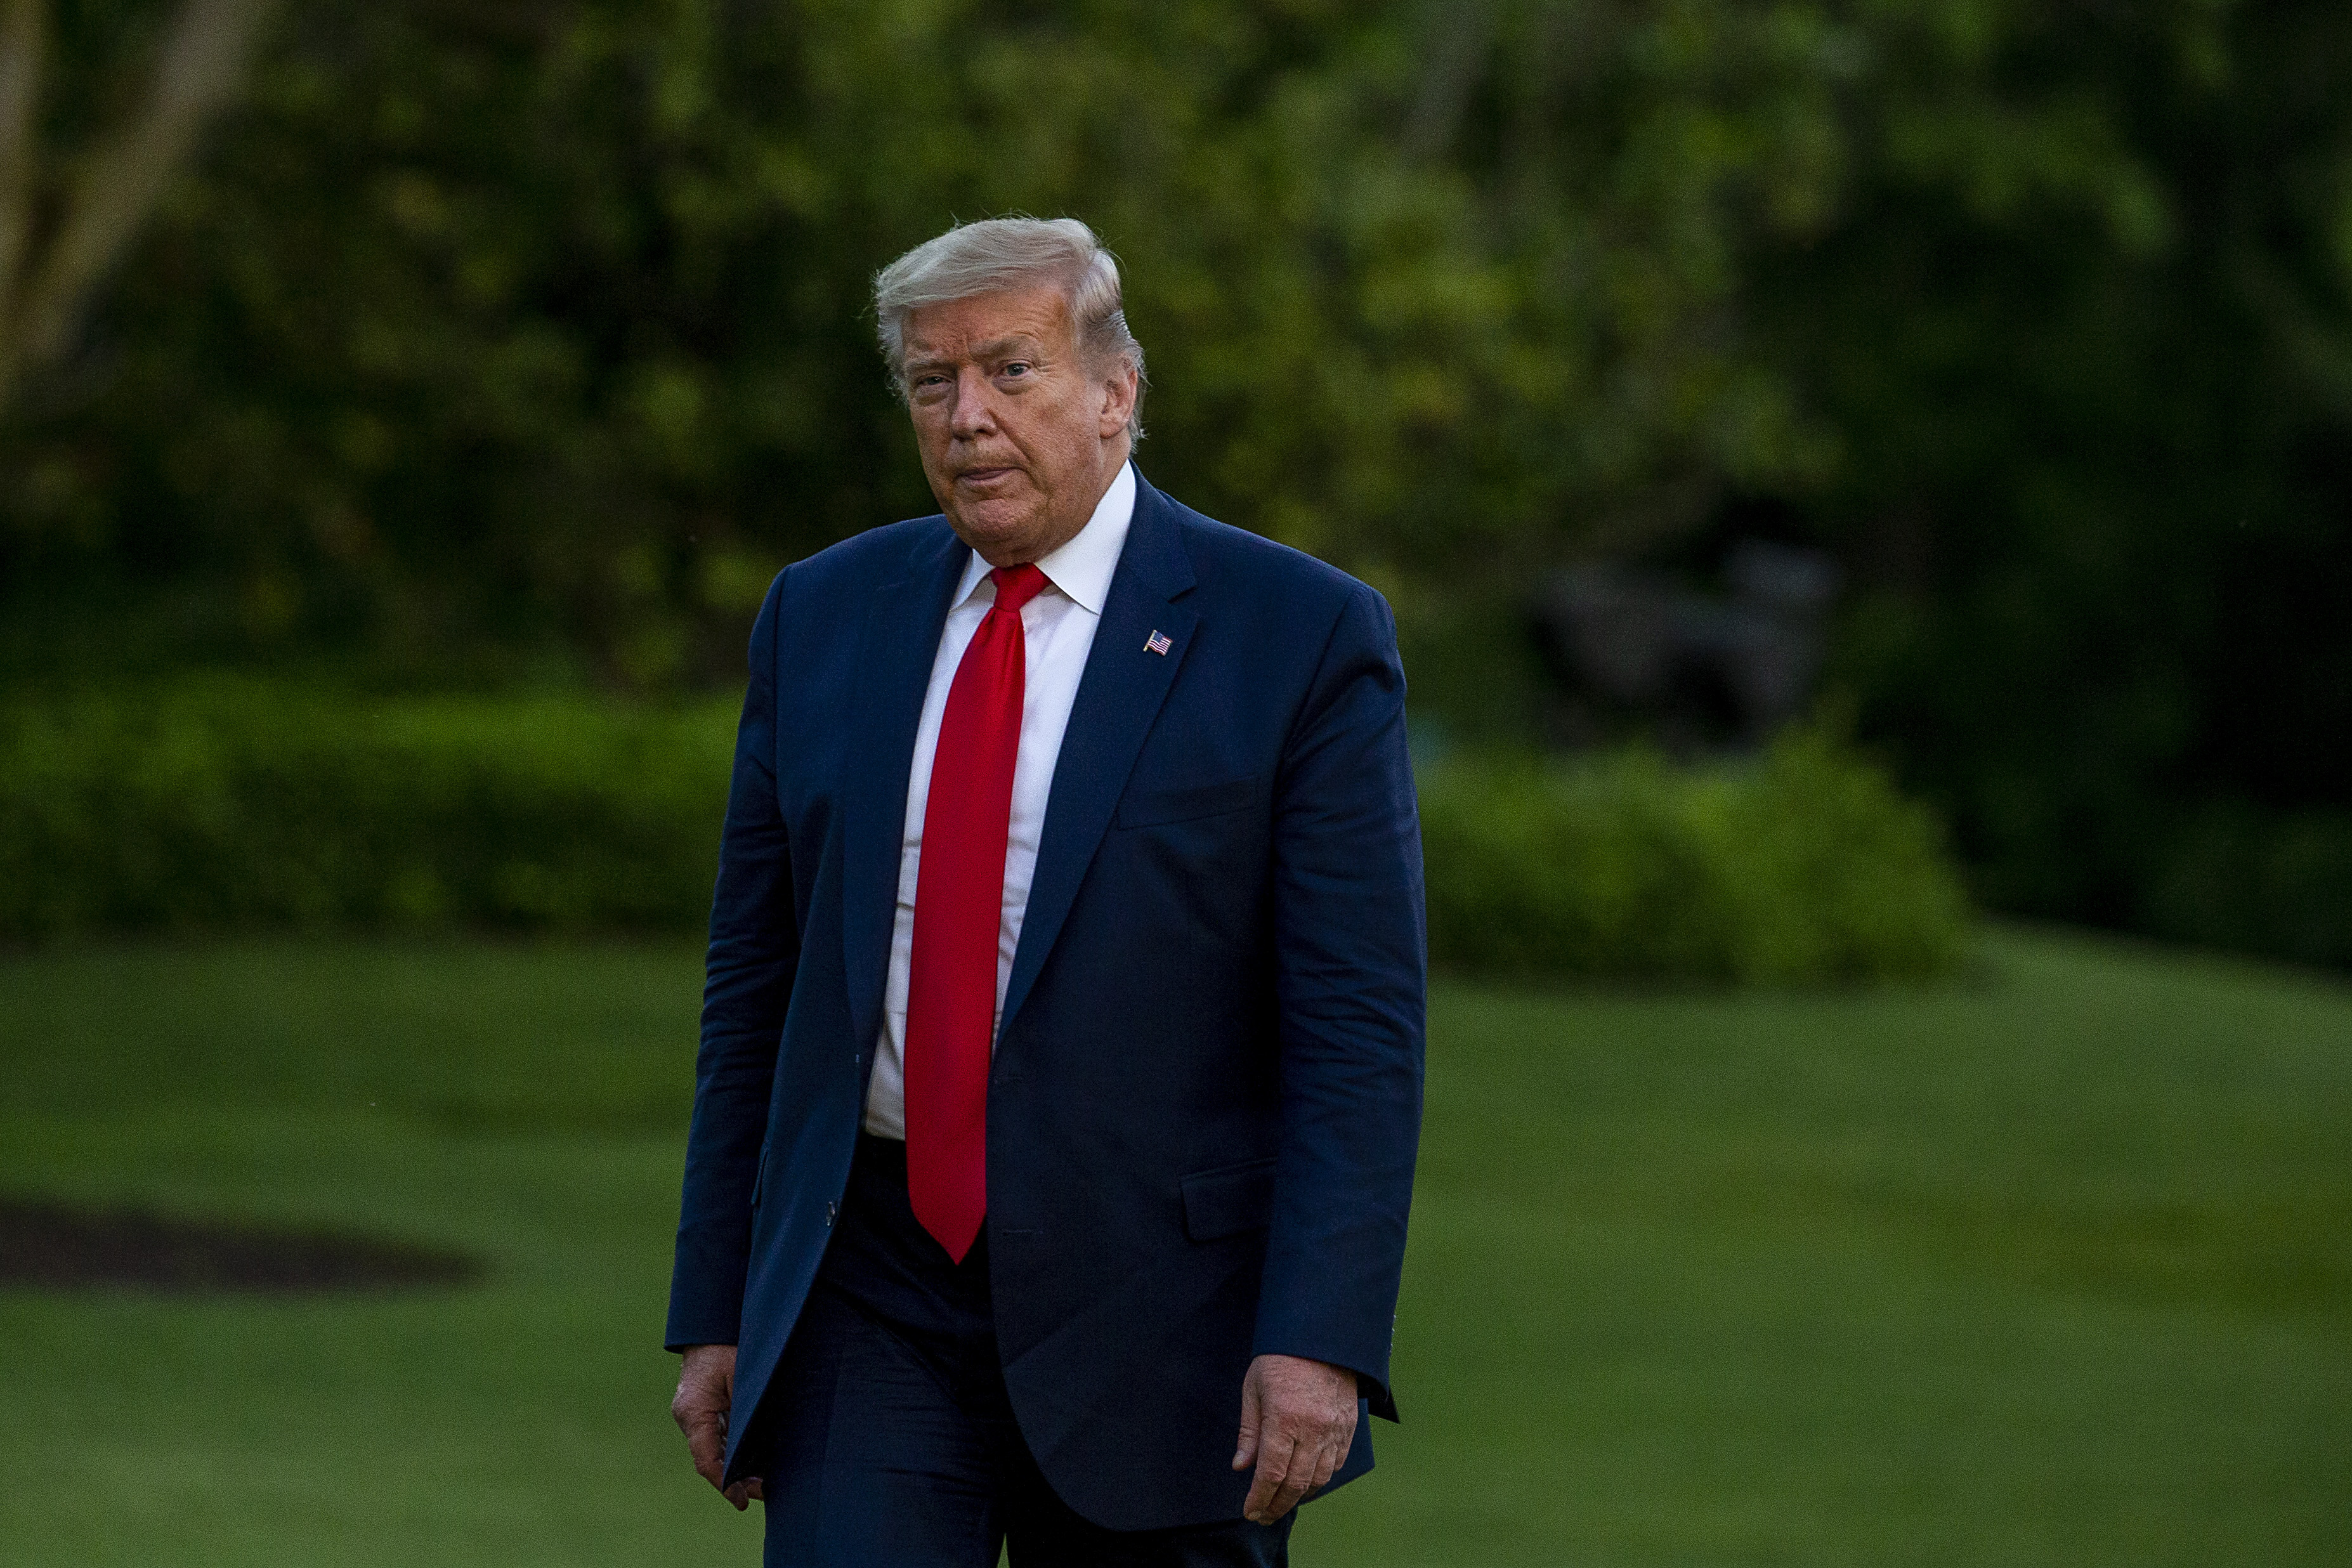 WASHINGTON, DC - MAY 30: U.S. President Donald Trump walks off Marine One on May 30, 2020 in Washington, DC. President Trump returned to Washington after the successful launch of the SpaceX Falcon 9 rocket with the manned Crew Dragon spacecraft at the Kennedy Space Center in Florida. (Photo by Tasos Katopodis/Getty Images)